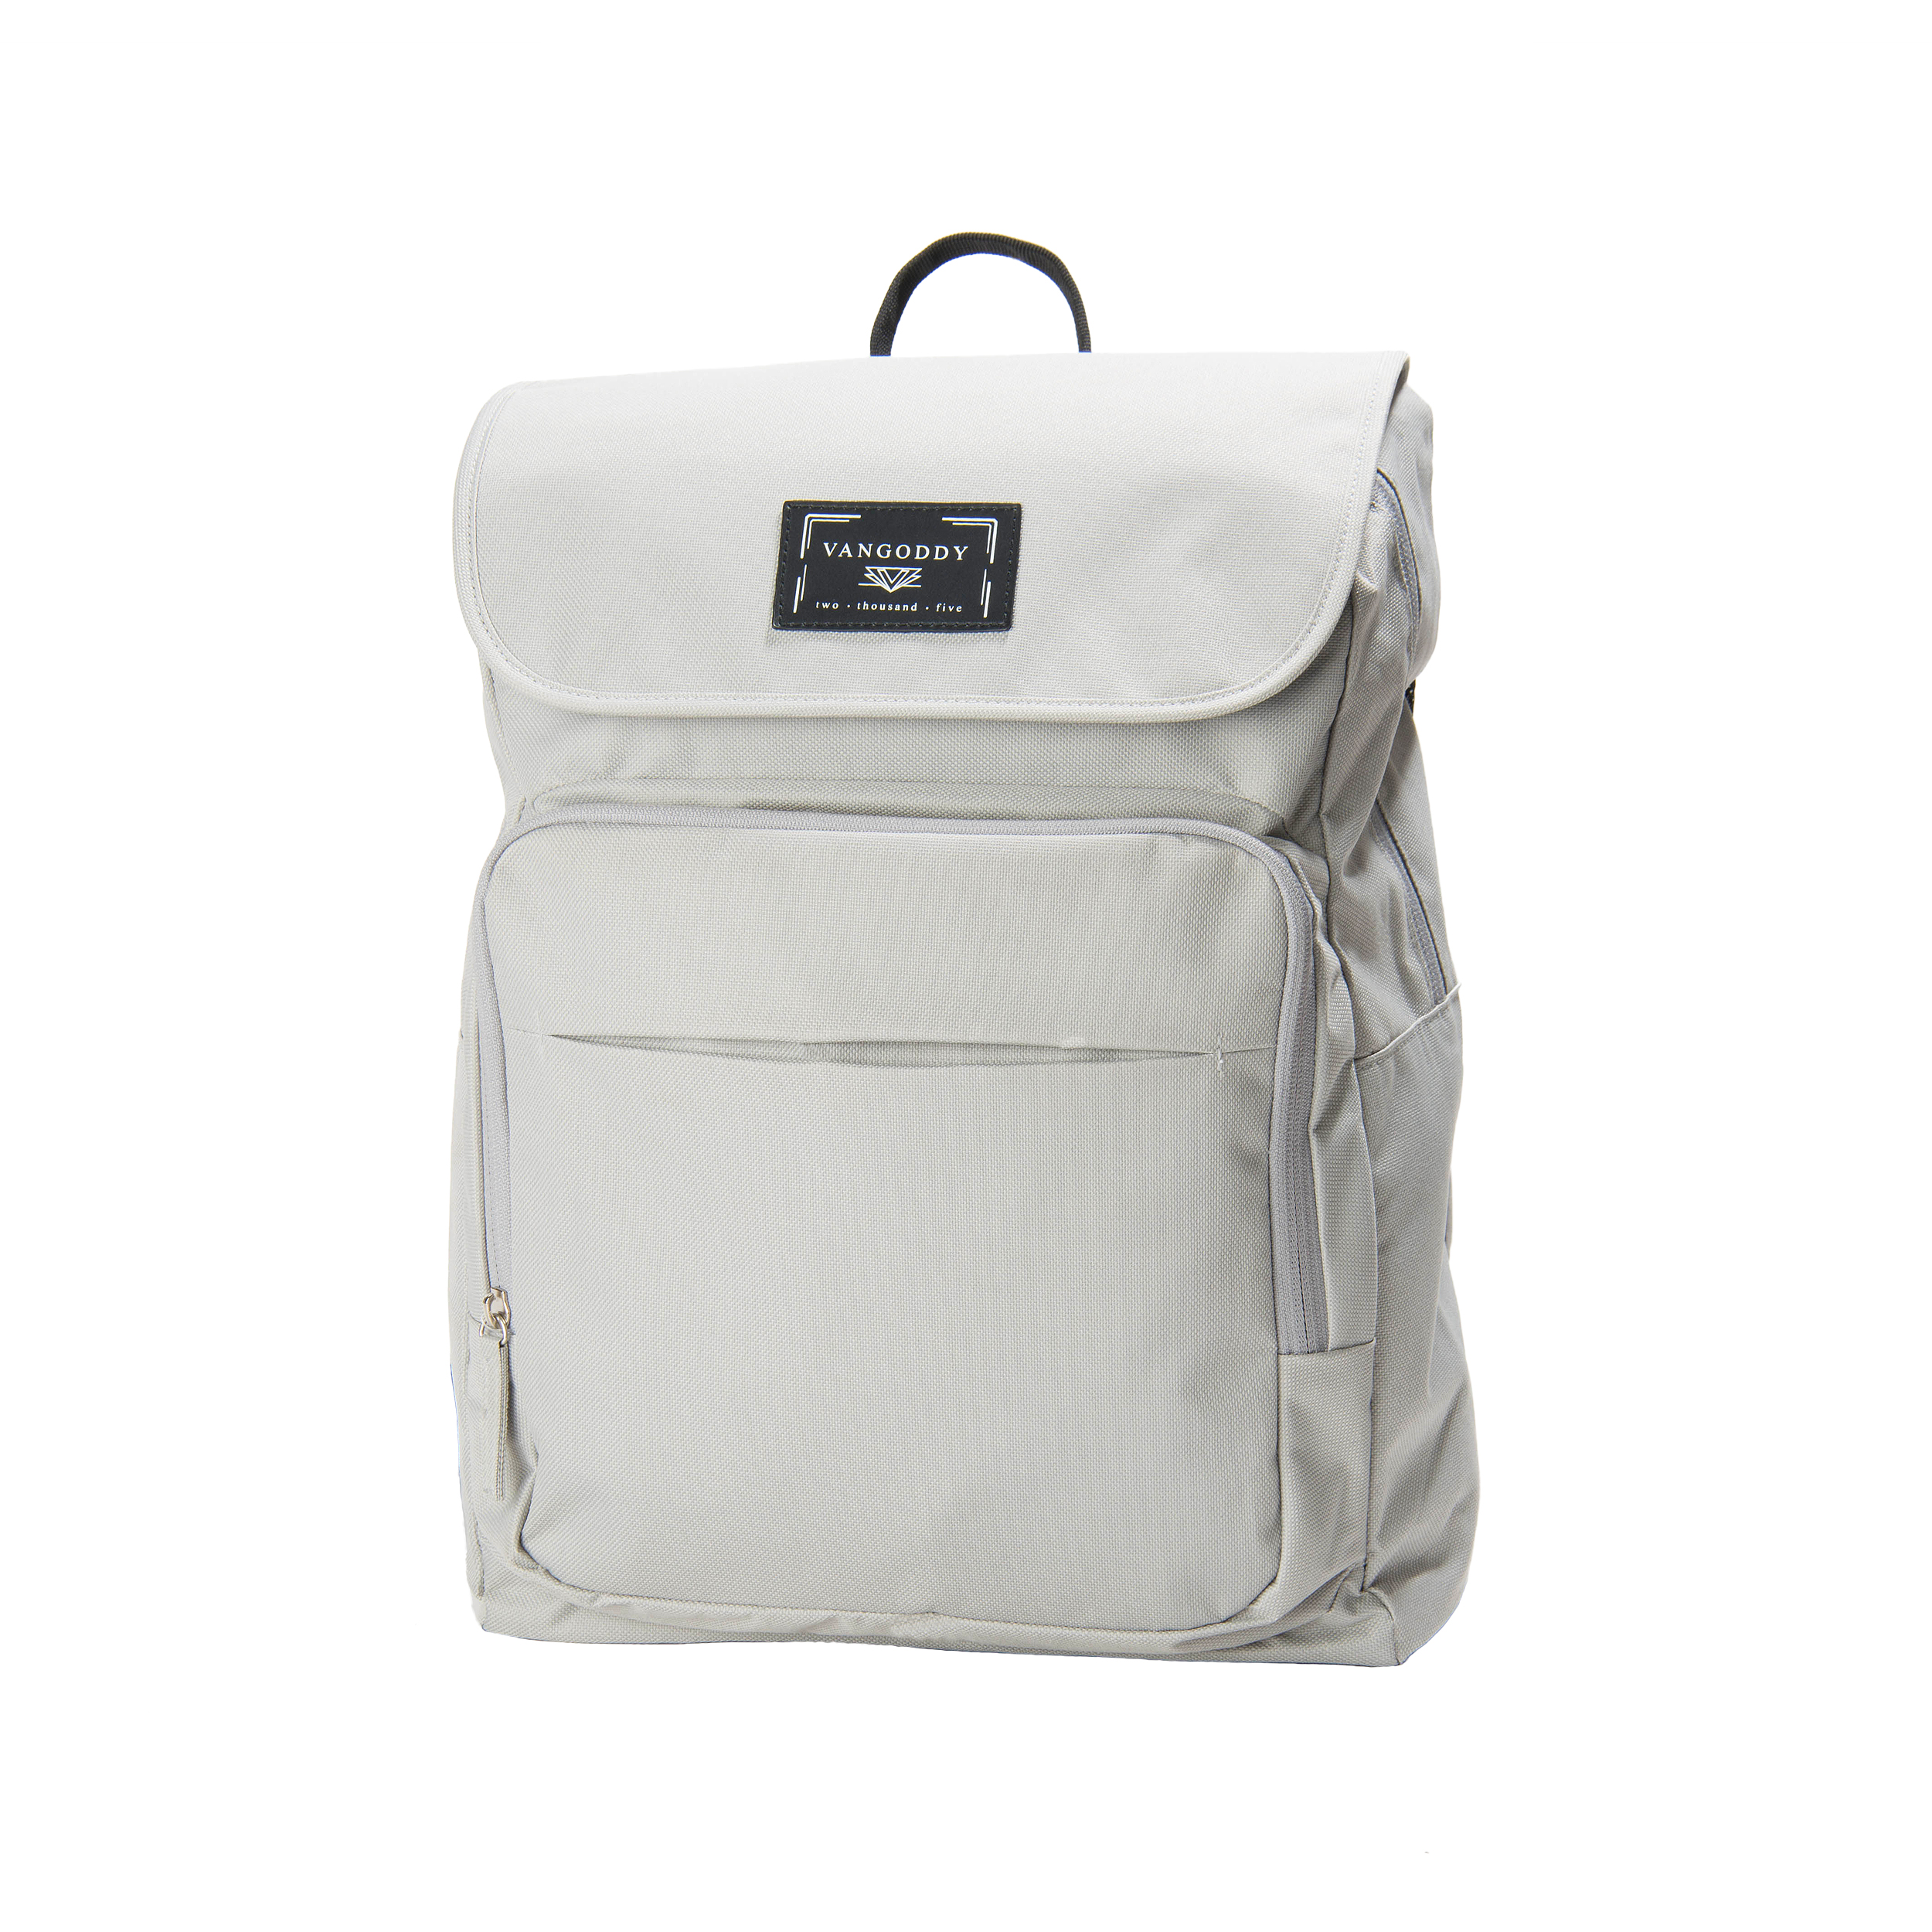 Grandiose Travel Business Backpack Fits up to 17.3, White